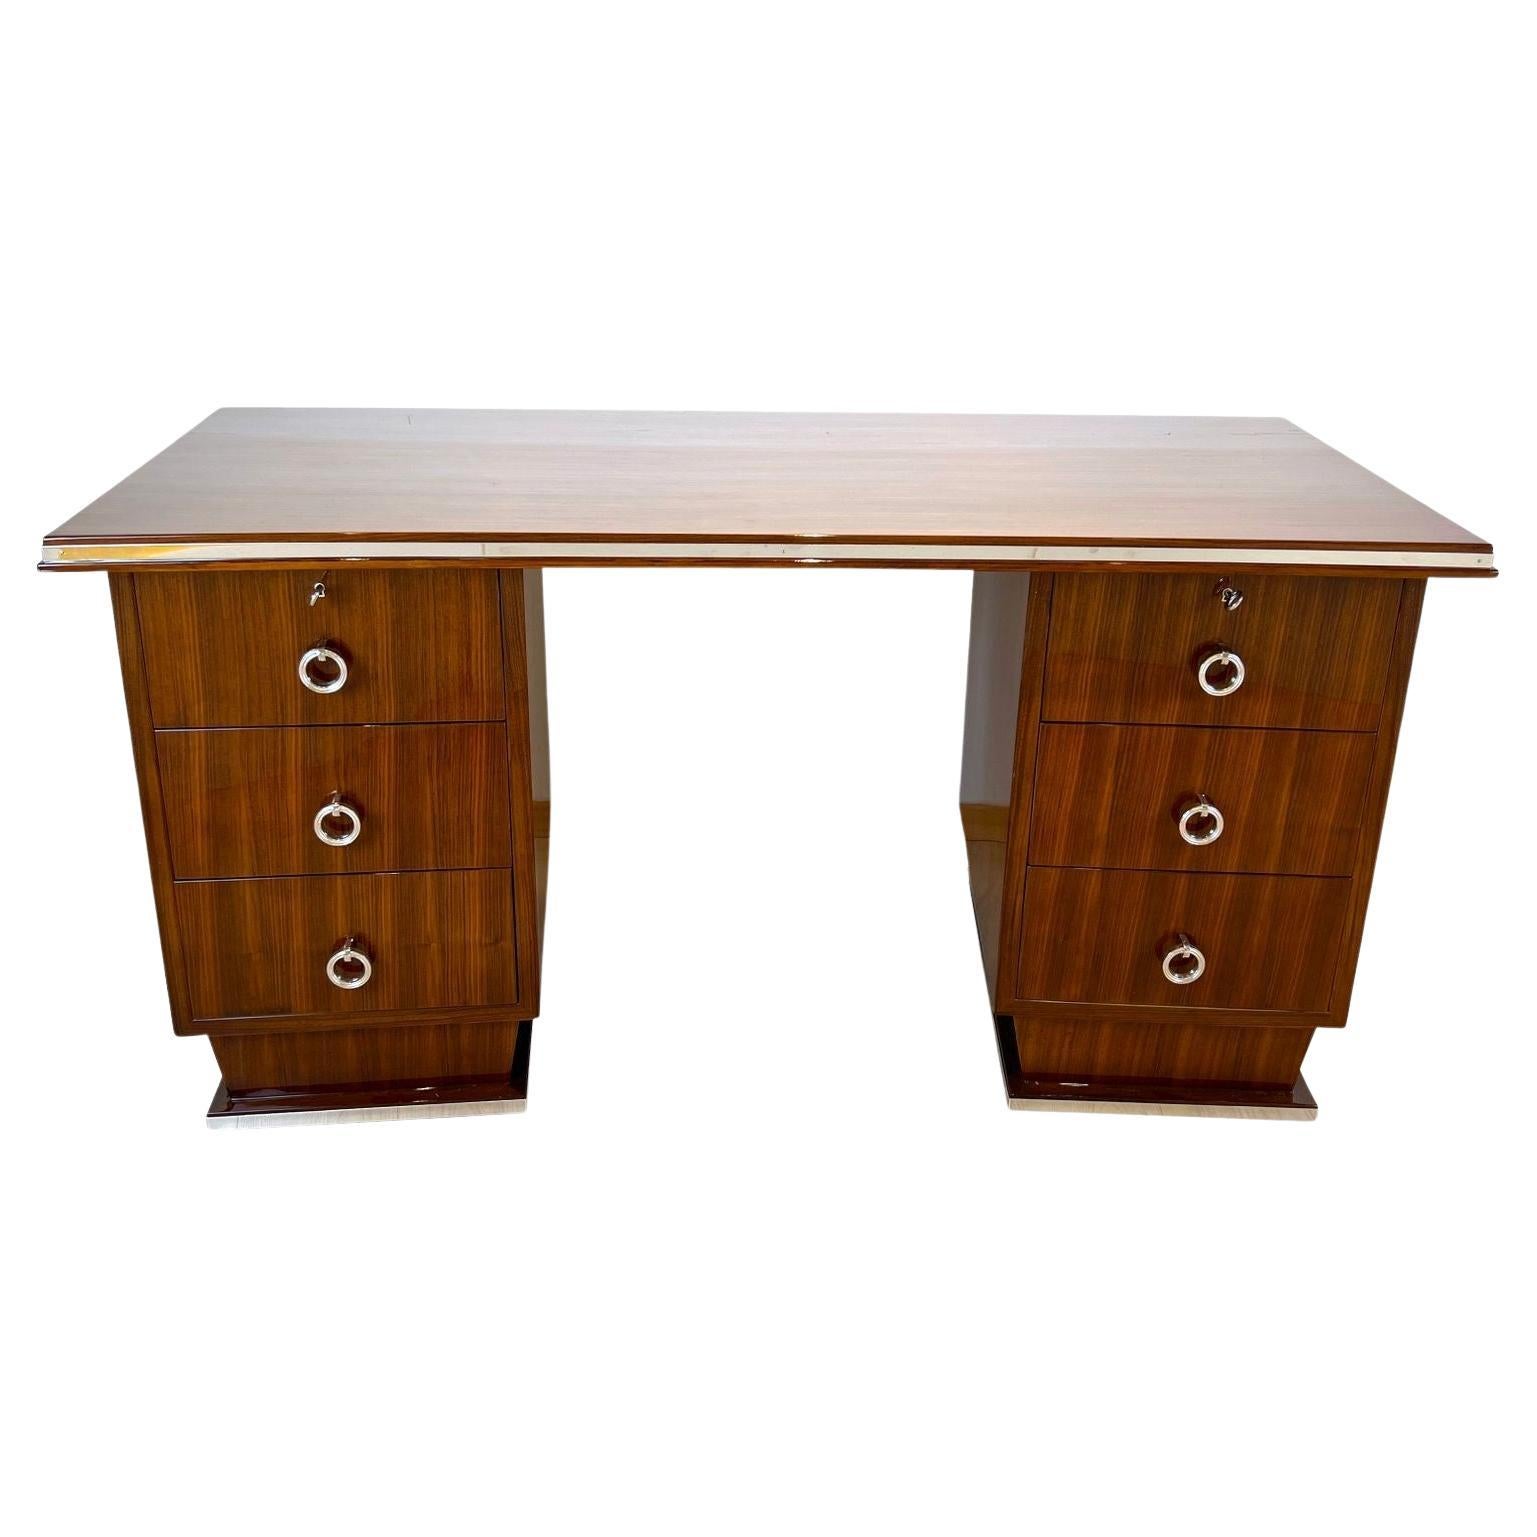 Beautiful balanced Art Deco Desk in high-gloss lacquered east-indian Rosewood with nickel plated handles. Fully restored, from France circa 1930.
 
Elegant modernist Art Deco design with slightly curved top. East Indian rosewood veneered, high gloss